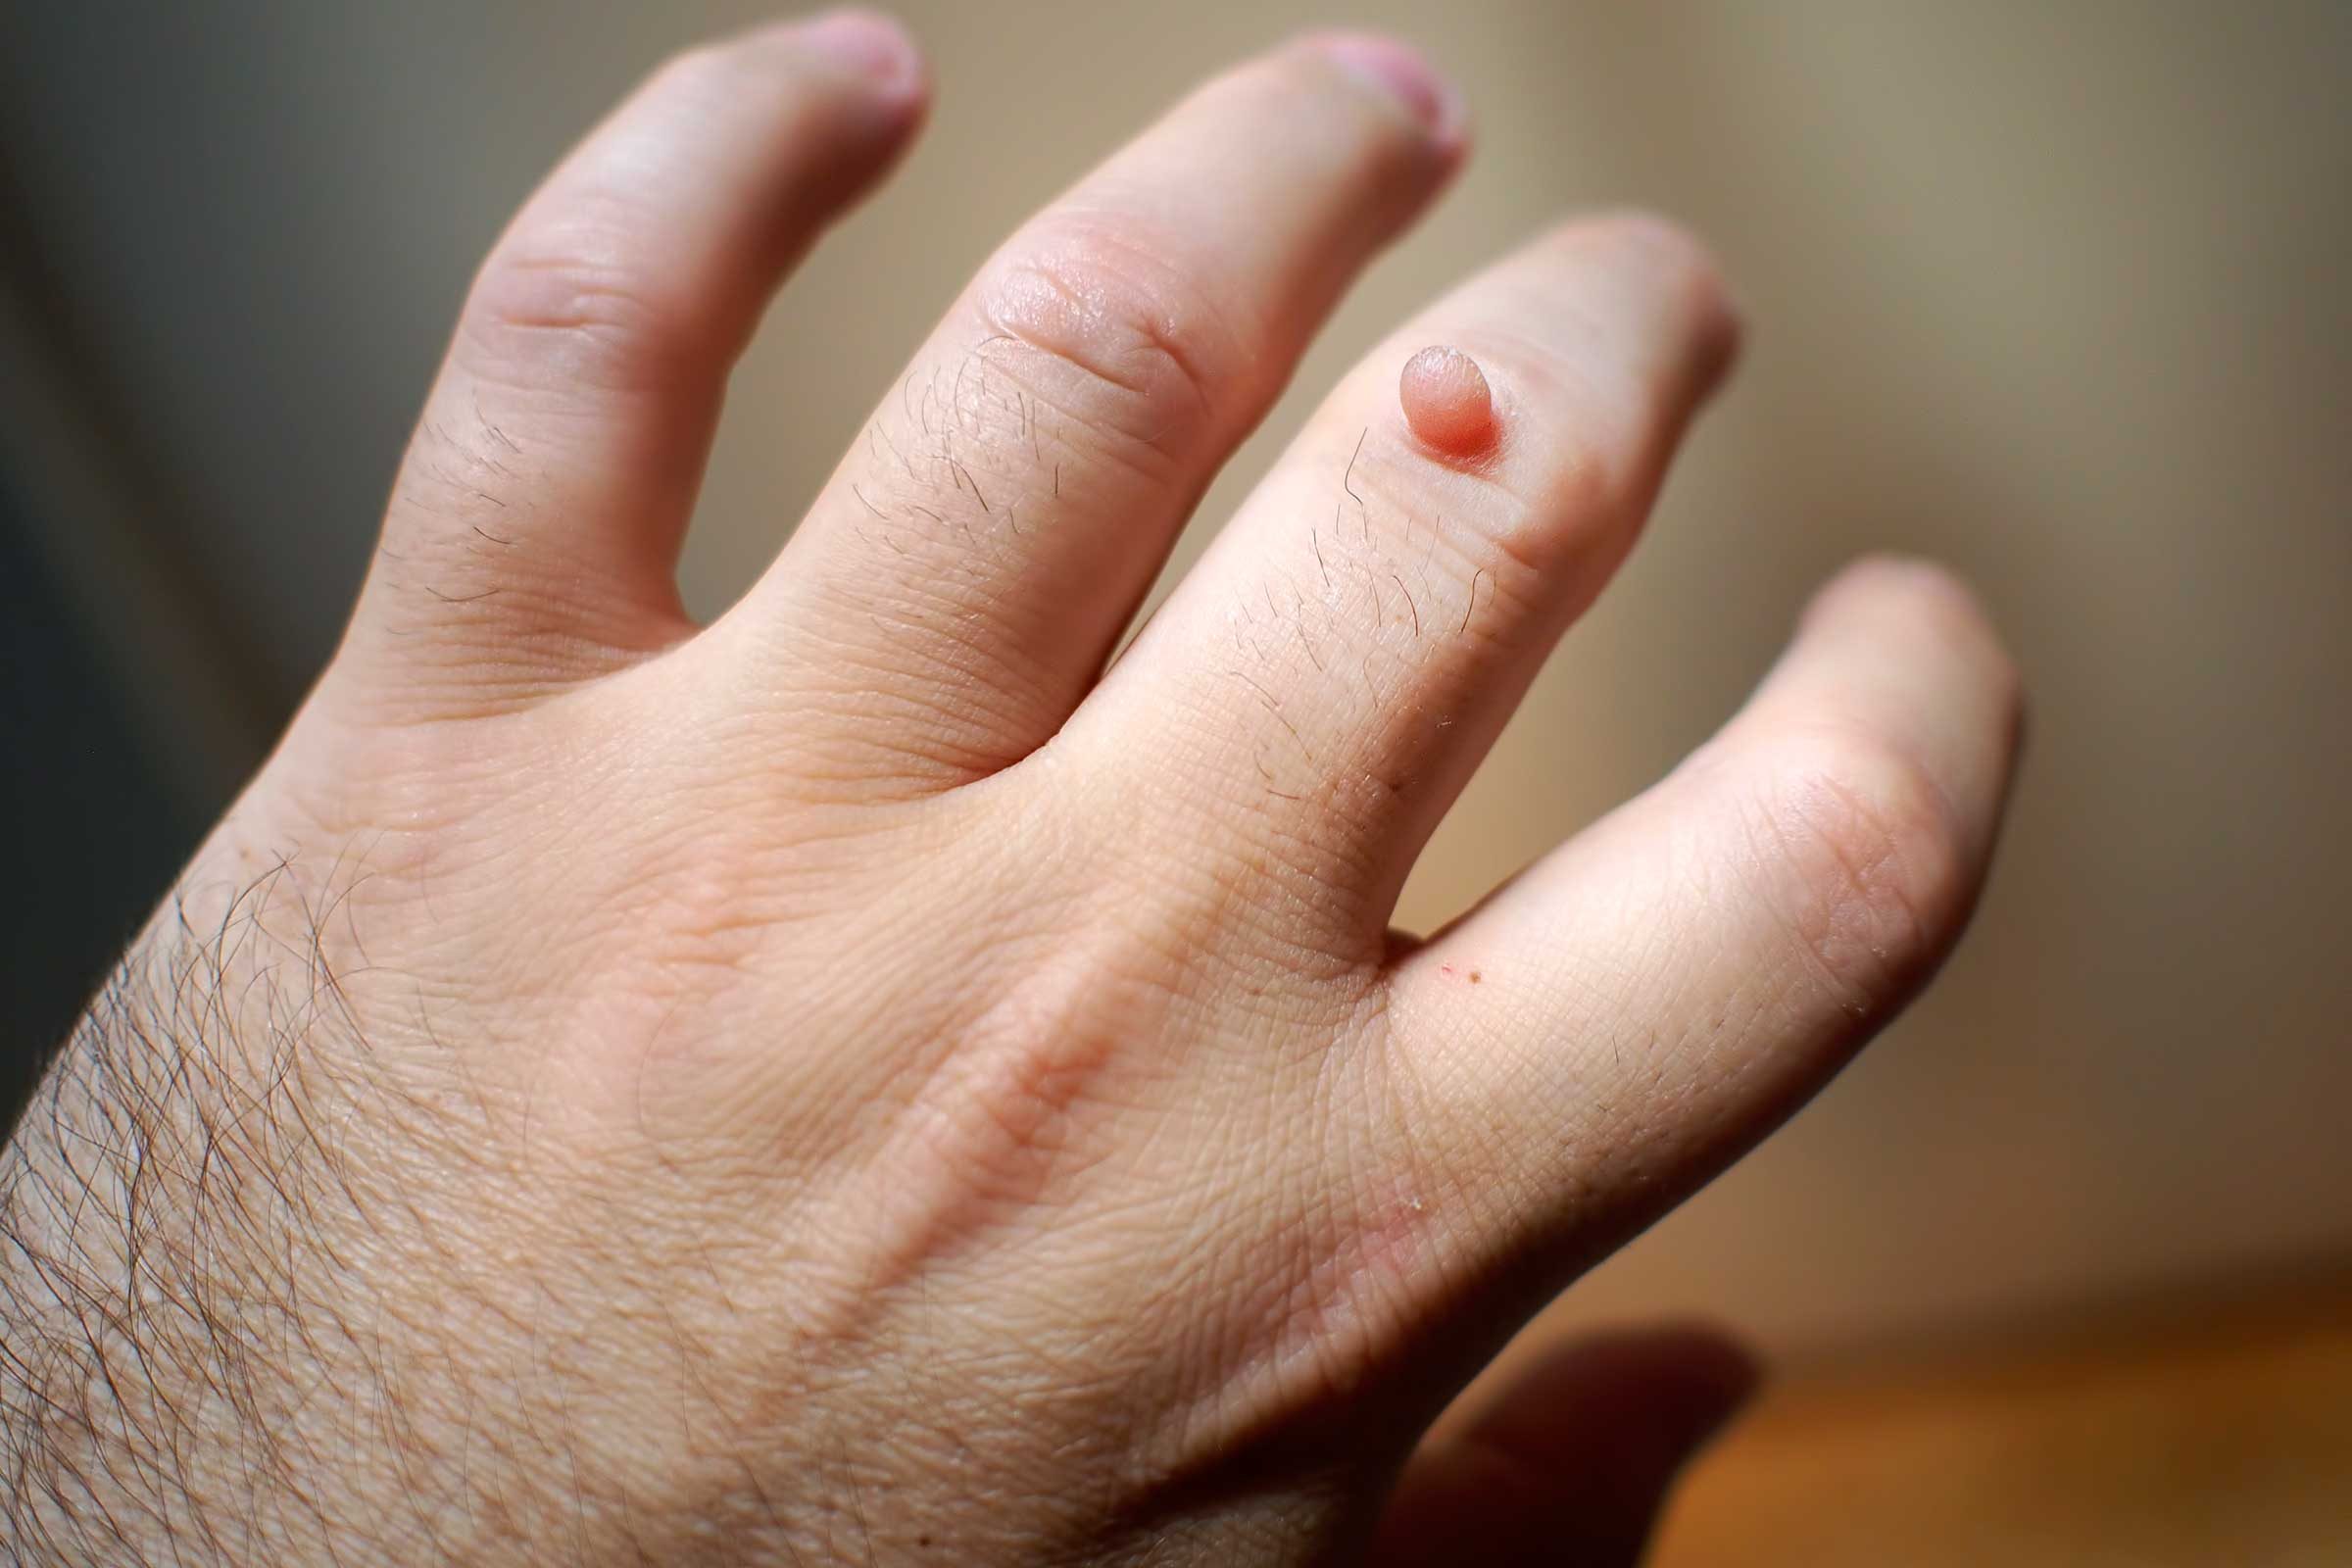 12 Home Remedies for Warts You Can Actually Make Right at Home